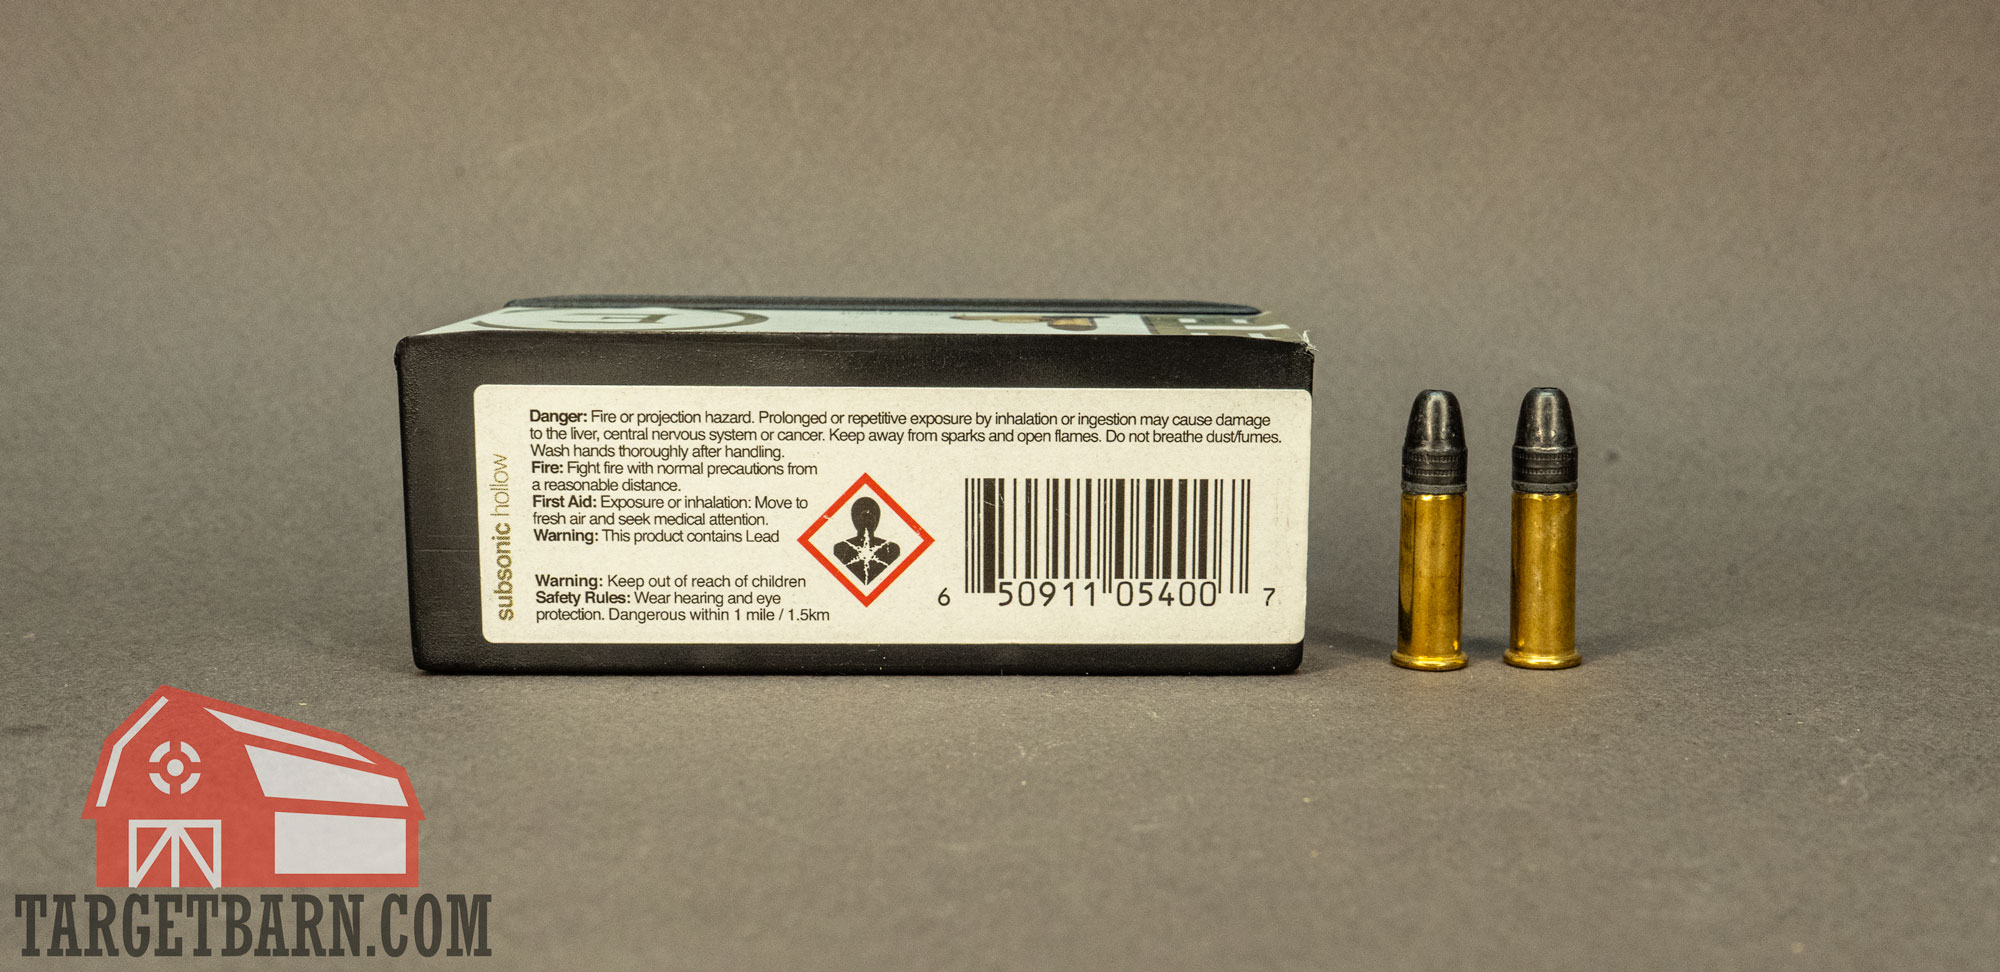 a box of eley 22lr ammo and two rounds showing the warning label on the box